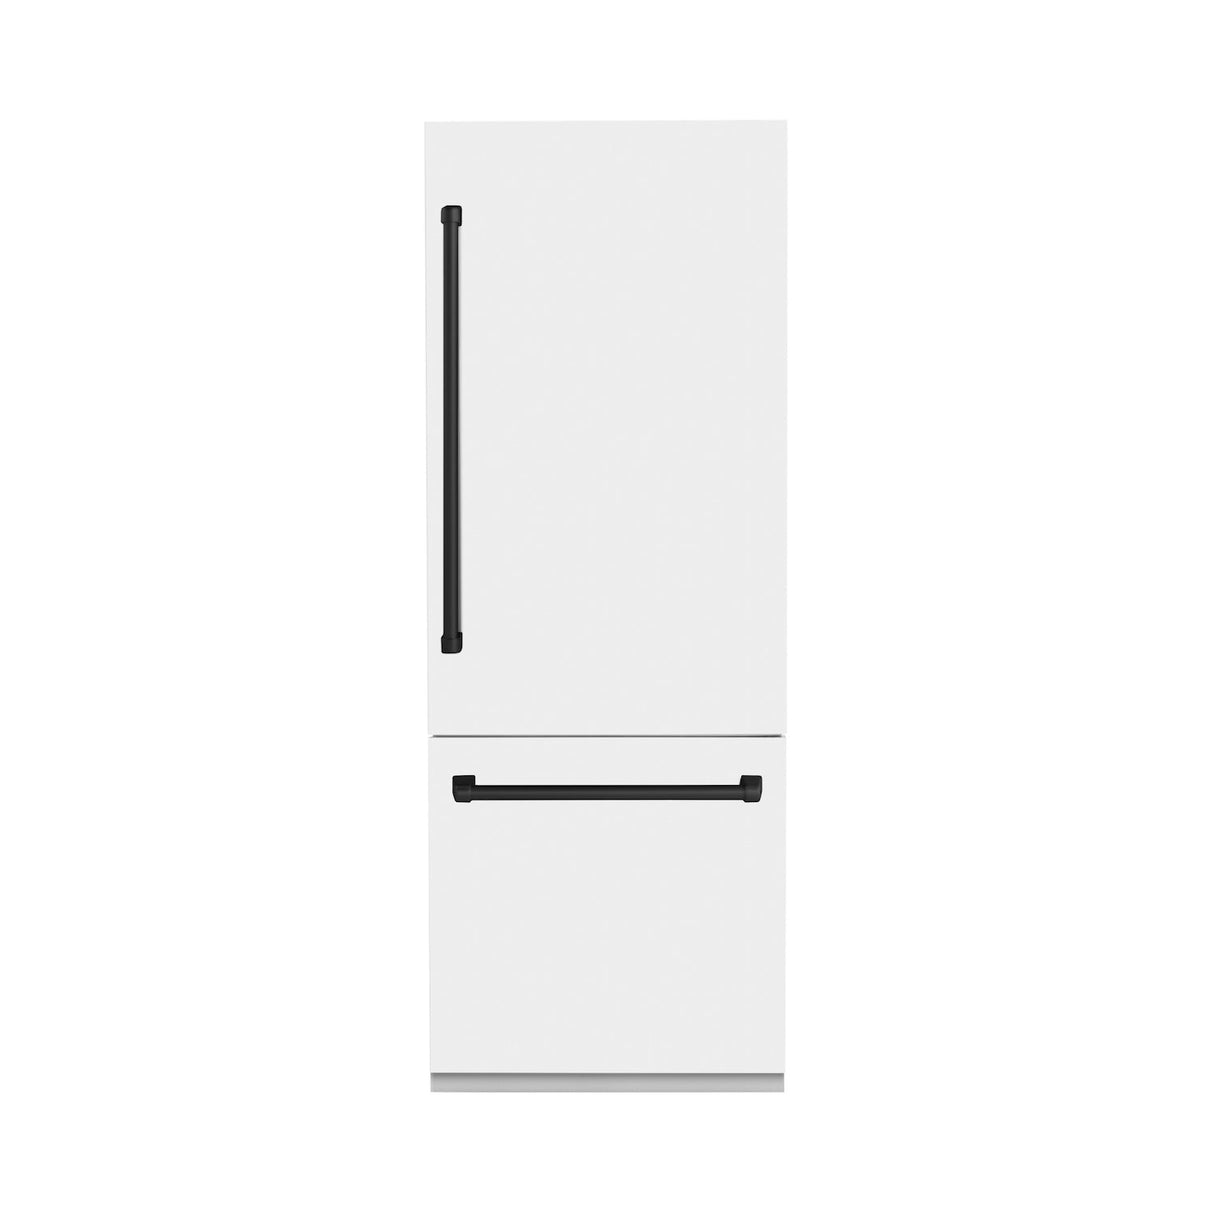 ZLINE Autograph Edition 30 in. 16.1 cu. ft. Built-in 2-Door Bottom Freezer Refrigerator with Internal Water and Ice Dispenser in White Matte with Matte Black Accents (RBIVZ-WM-30-MB)